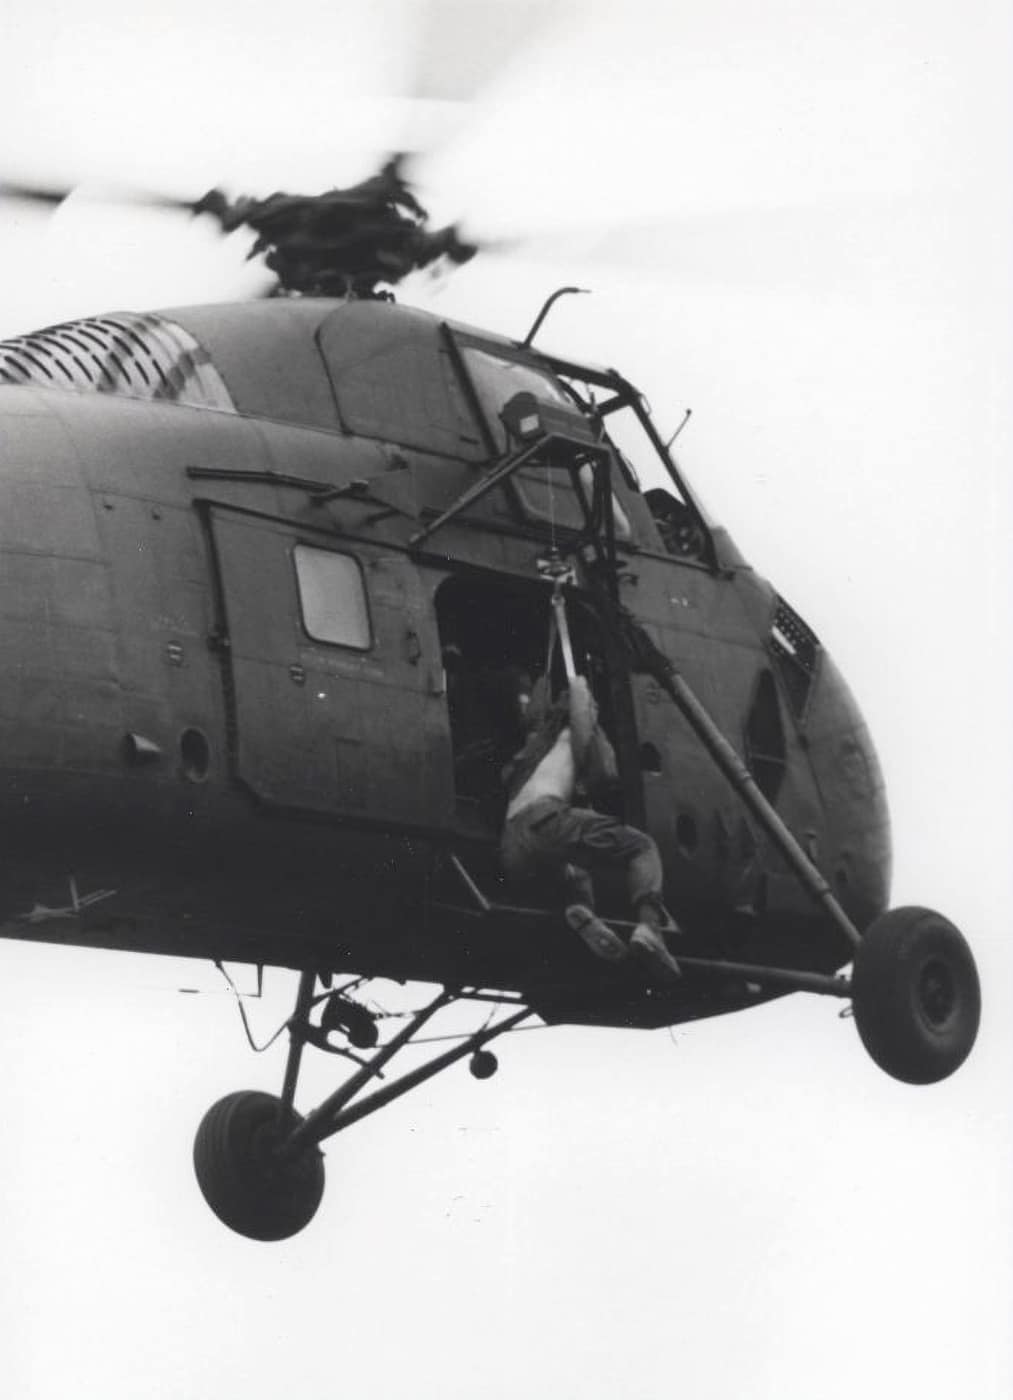 In this photo, a wounded U.S. Marine is air lifted from the combat zone using a hoist and harness. He was transported to a field hospital for triage and treatment before being transported to a general military hospital for recovery. While the Sikorsky helicopter was not the most powerful, it was able to transport 8 wounded people in litters — more if sitting upright. 